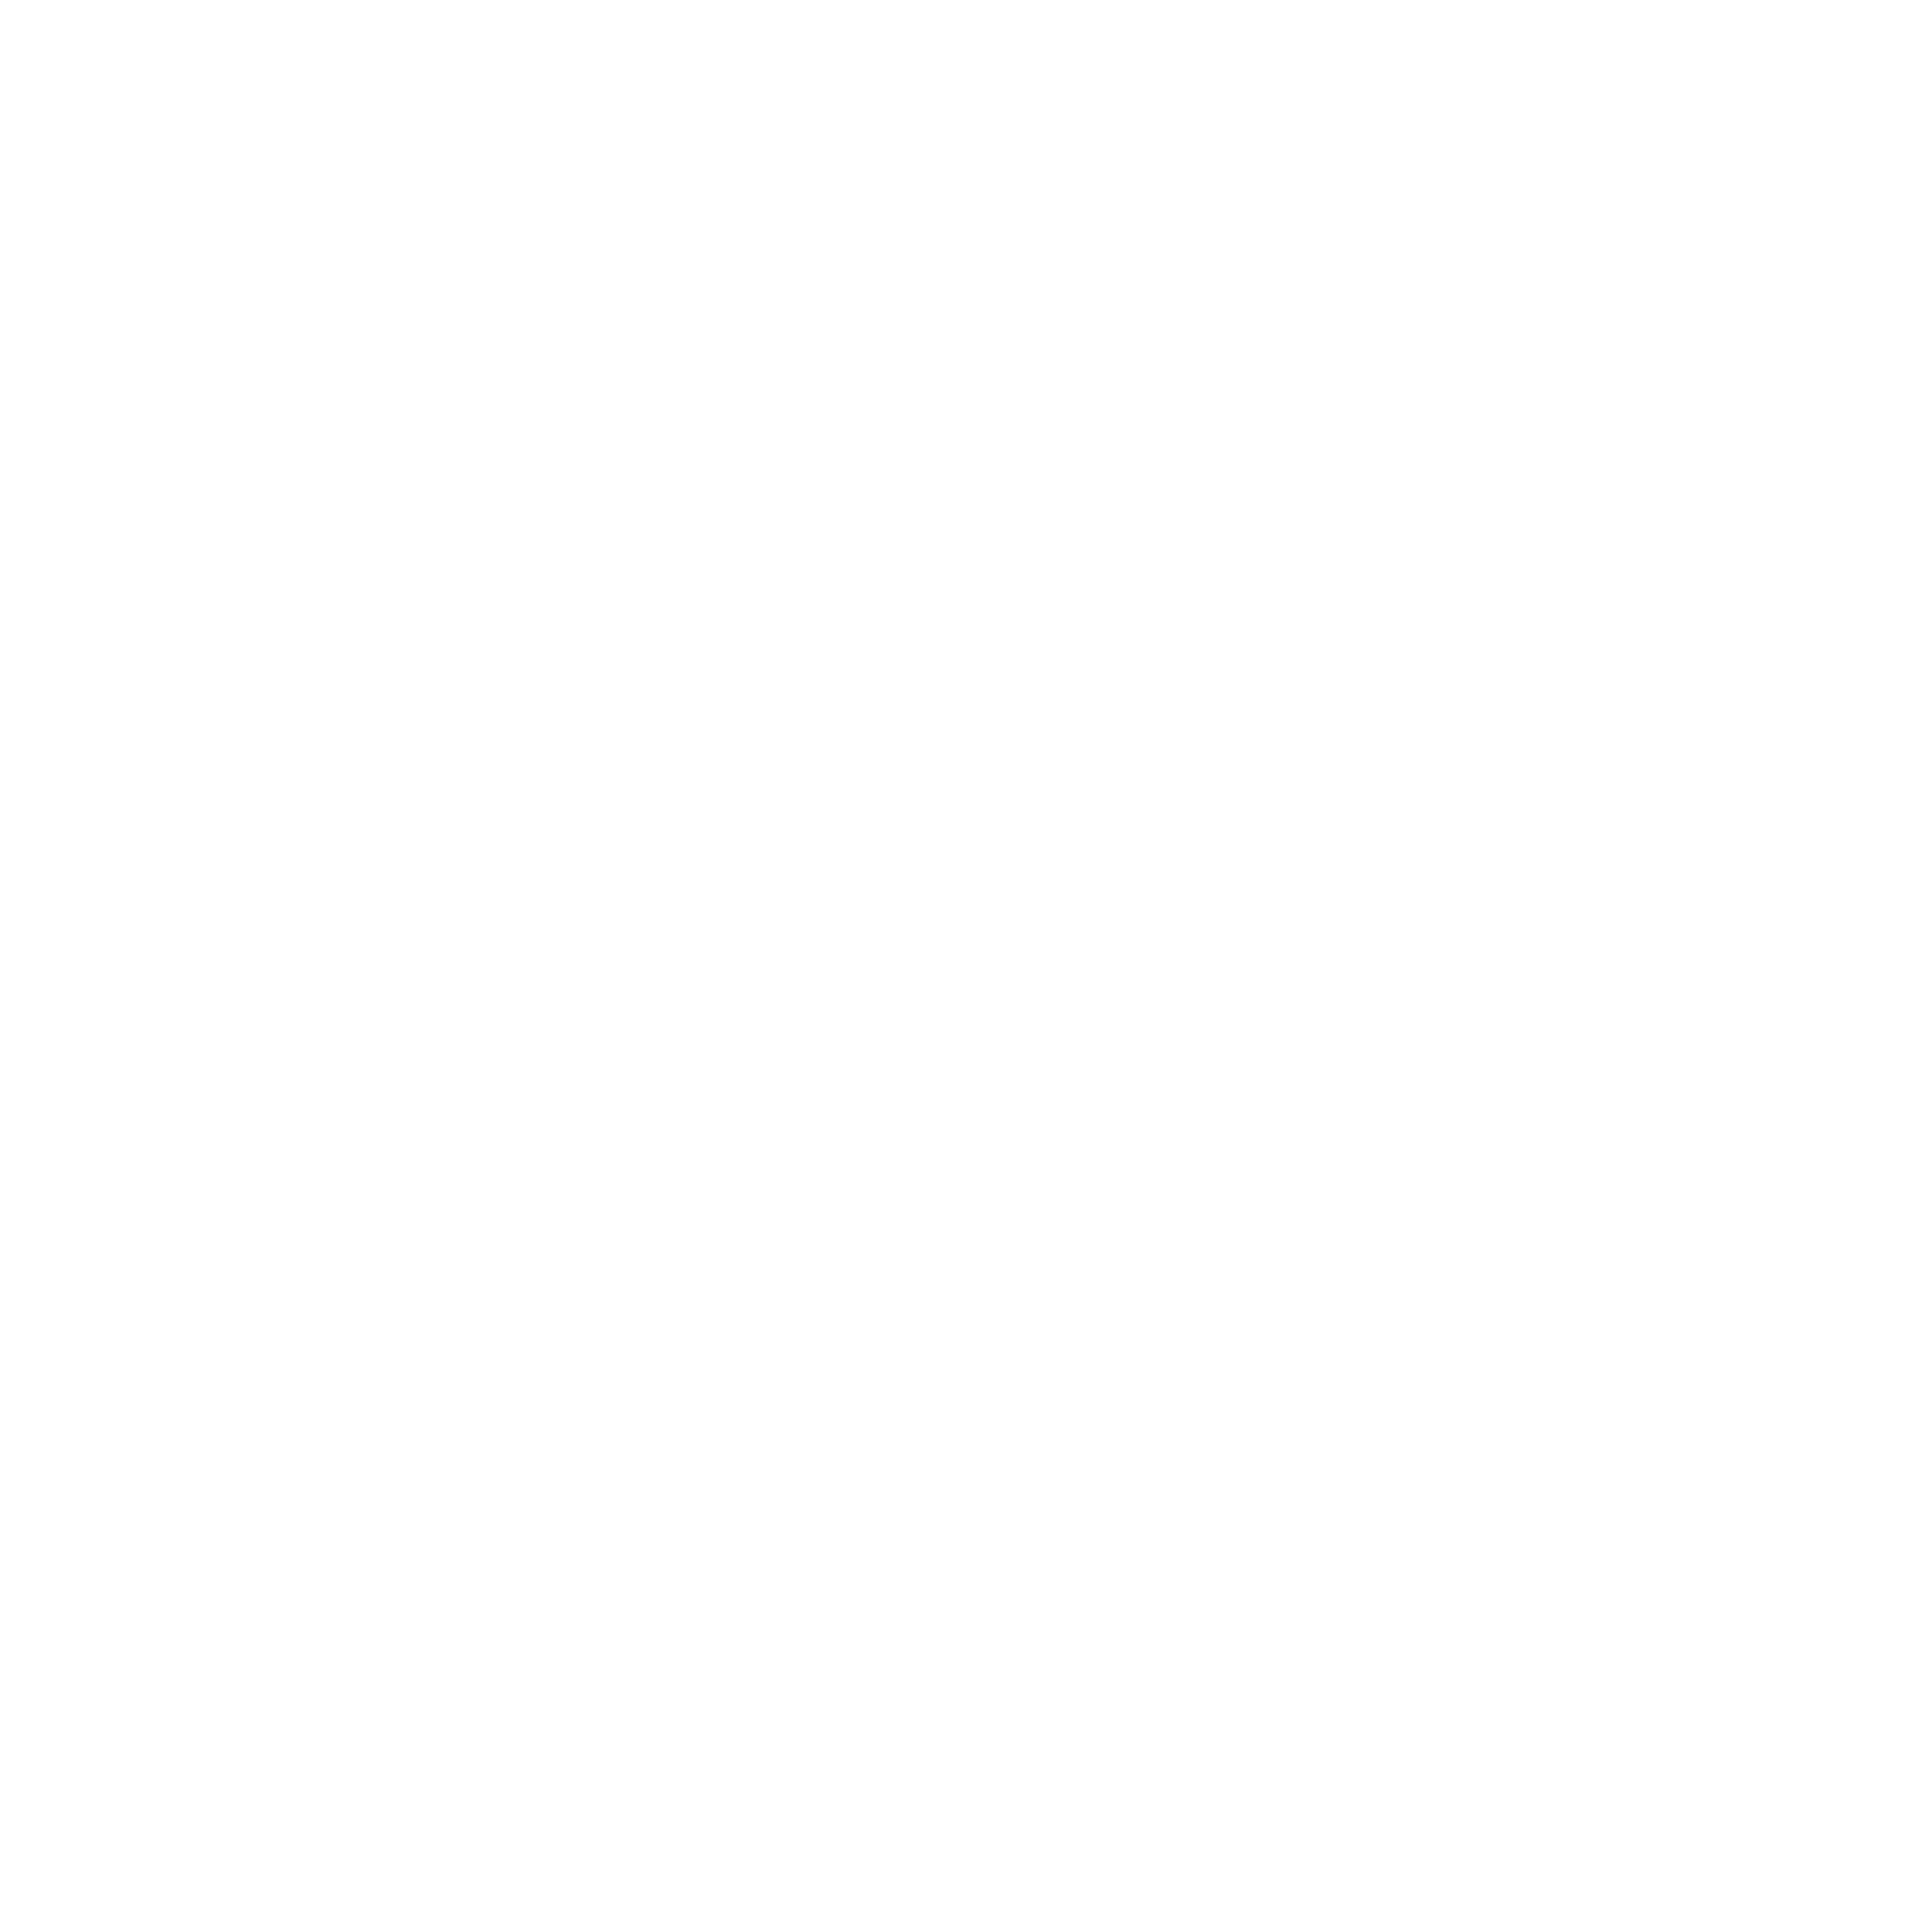 HCM Integrations & Analytics Hub logo with text around a circle conating a graphic of three people in a rising bar graph split with an right upward arrow.